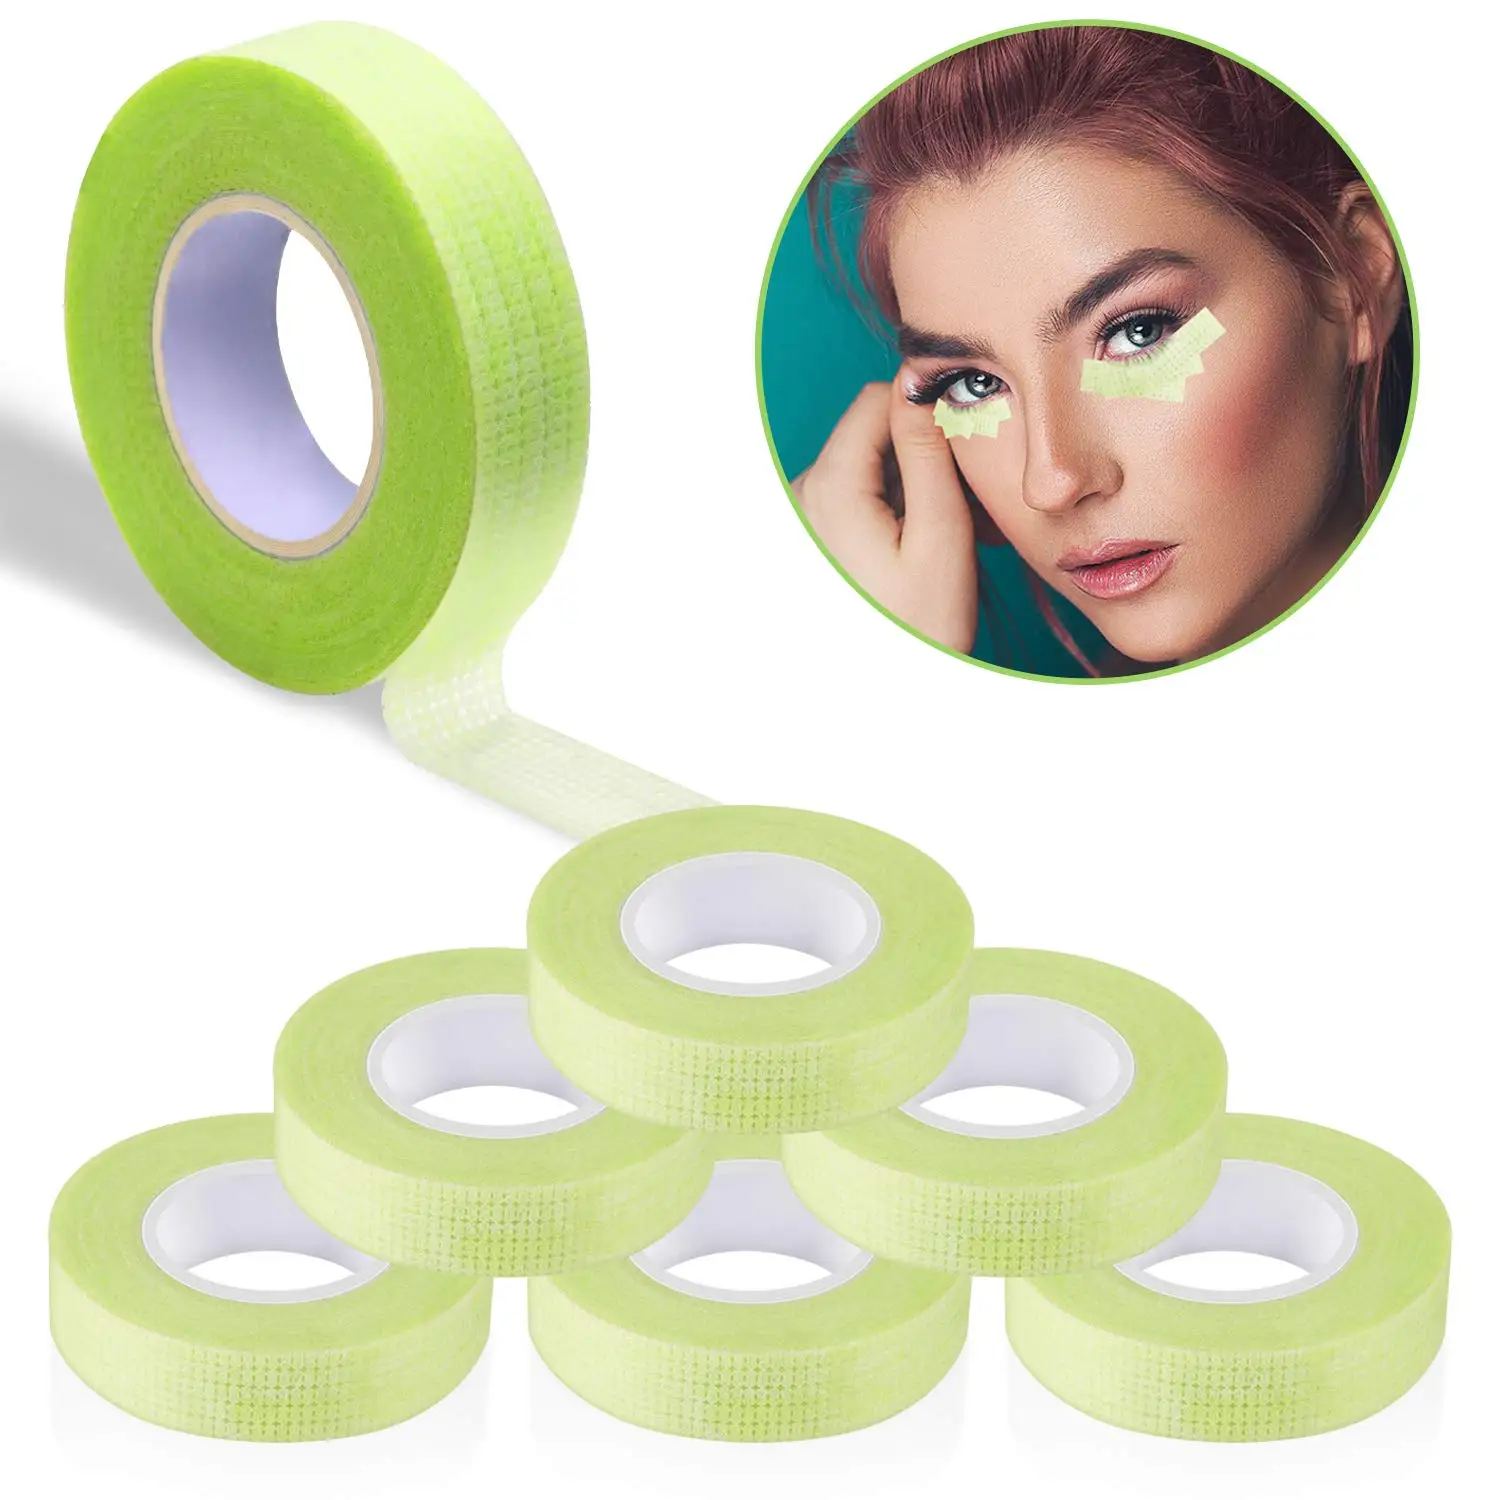 

Green Lash Tape for lash Extension, Adhesive Breathable Micropore Fabric Medical Tape for Eyelash Extension Supply, As the picture